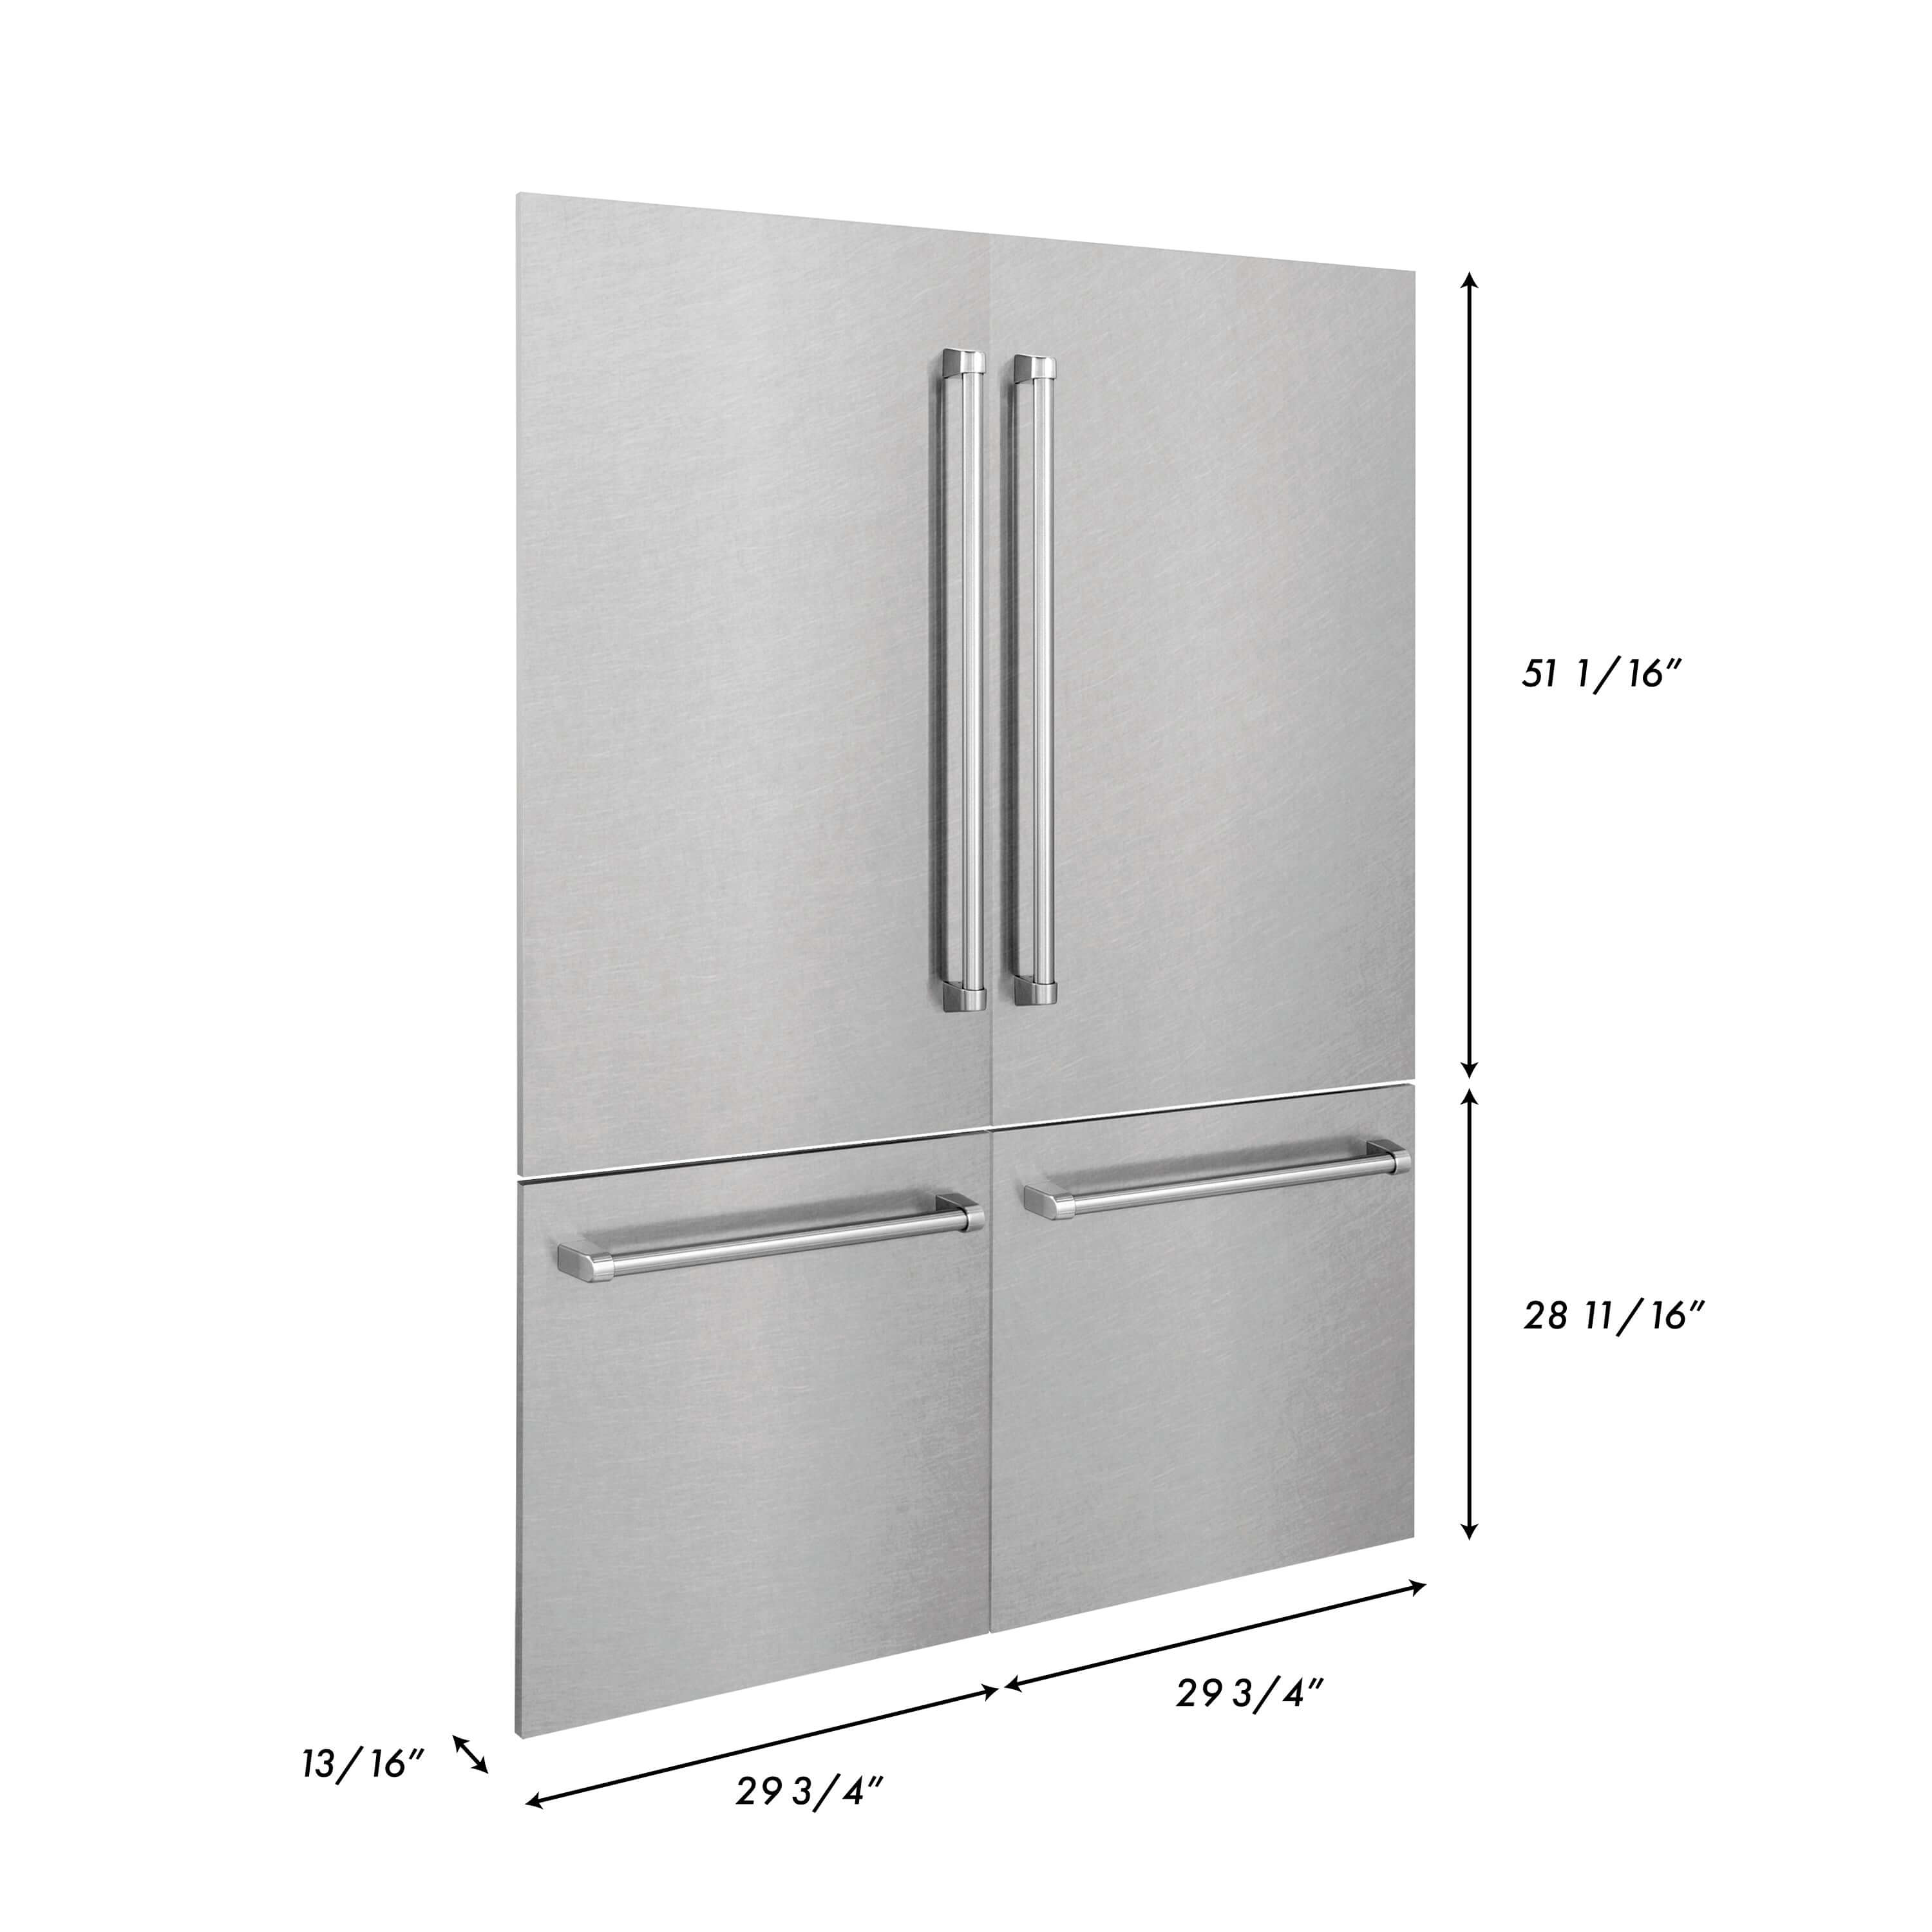 Panels & Handles Only- ZLINE 60 in. Refrigerator Panels in Fingerprint Resistant Stainless Steel for a 60 in. Built-in Refrigerator (RPBIV-SN-60) dimensional diagram with measurements.